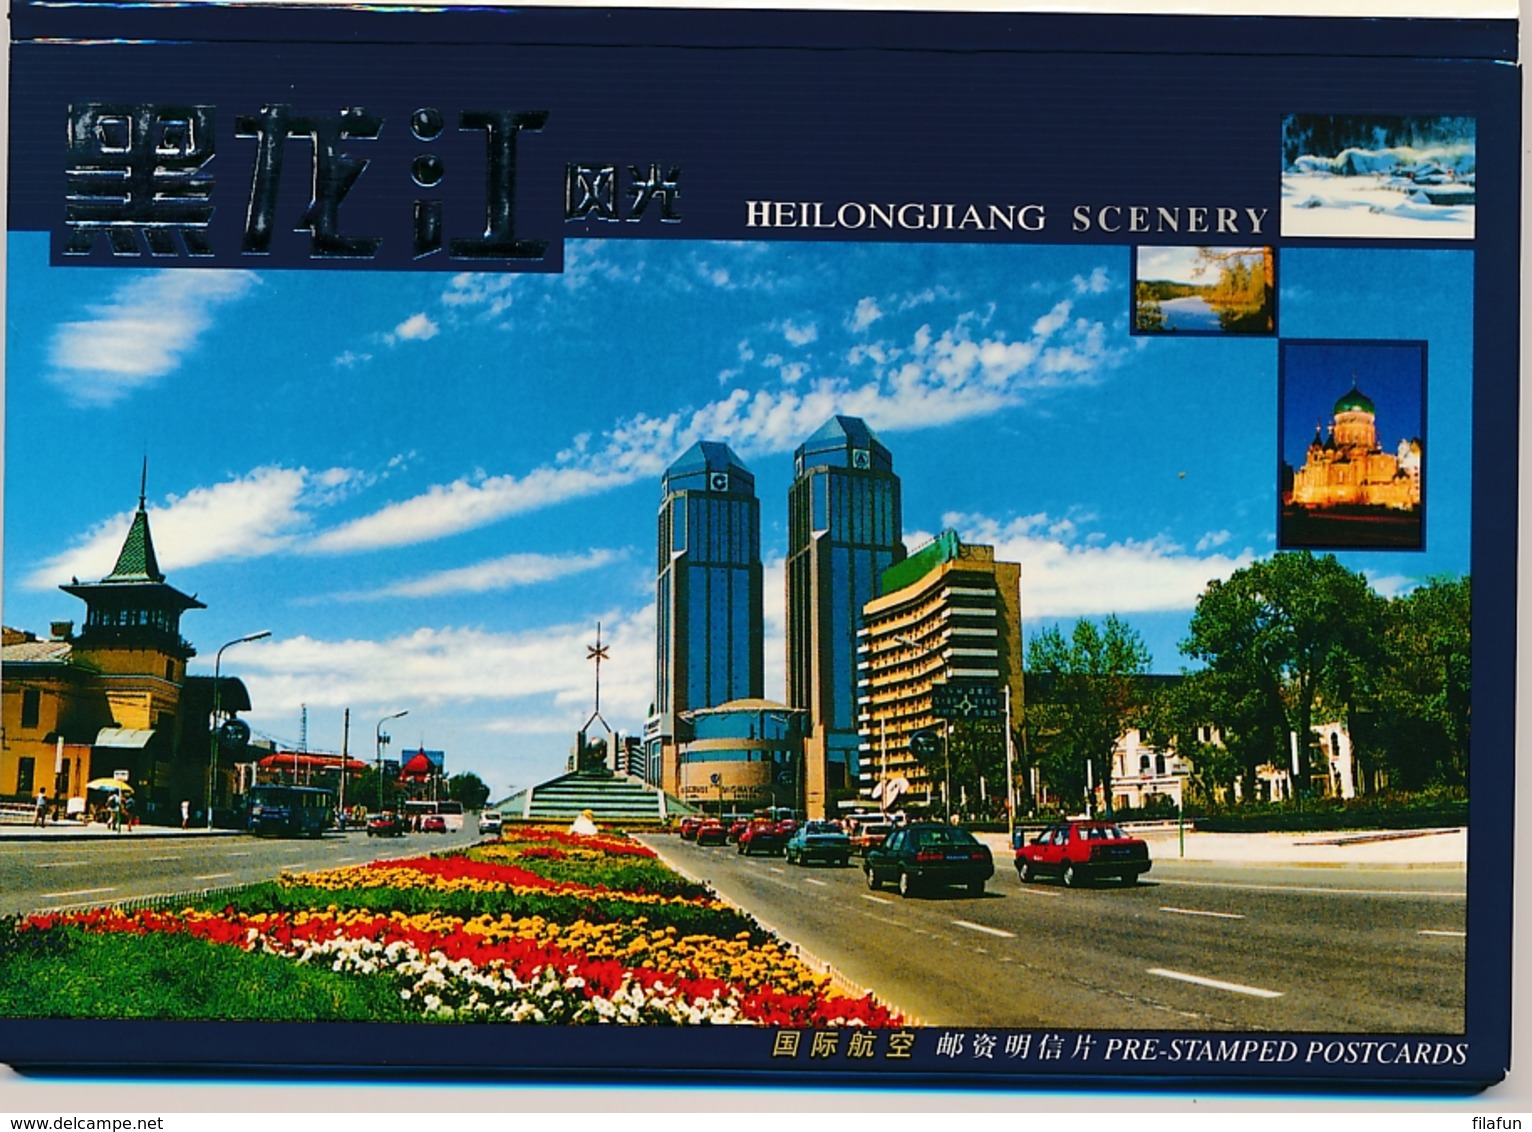 China - 2002 - FP19 The Scenery Of Heilongjiang Postcard Folder Containing 10 Cancelled Cards - New - Postkaarten